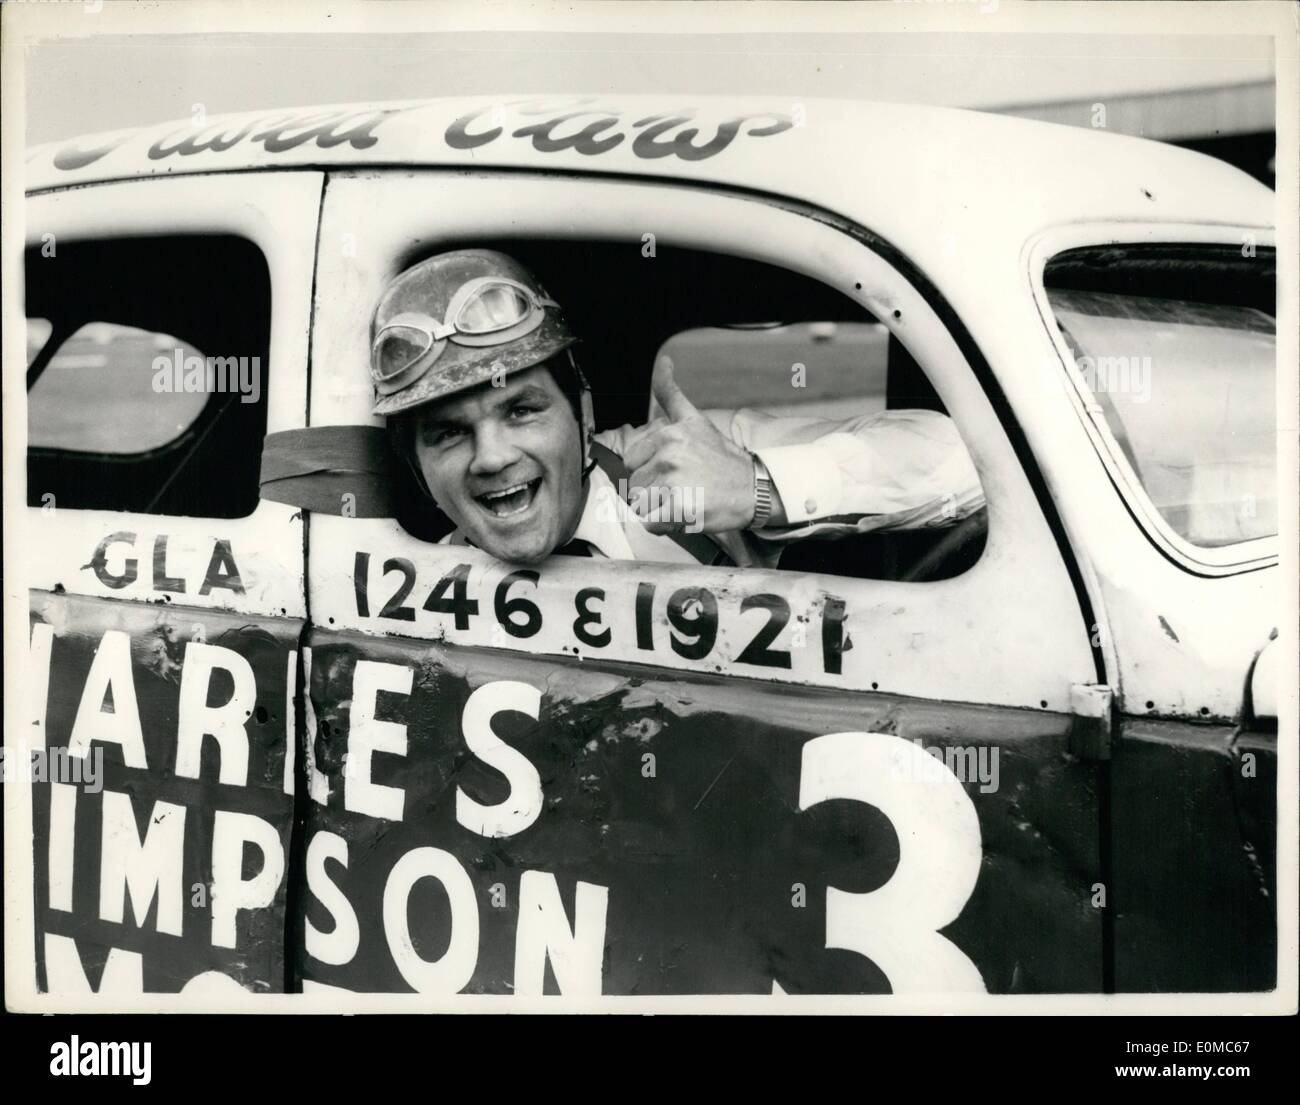 Aug. 08, 1954 - Freddie Mills To Drive In A Stock Car Race For A Bet With Jack Solomons: Jack Solomons has bet Freddie Mills a new suit that he daren't drive in a Stock Car race. To-day Freddie went along th Harringay to get in some practice with a view to taking part in a race next week. Photo shows Freddie Mills wearing a crash-helmet gives the thumbs-up sigh before starting out on a trial run this afternoon. Stock Photo